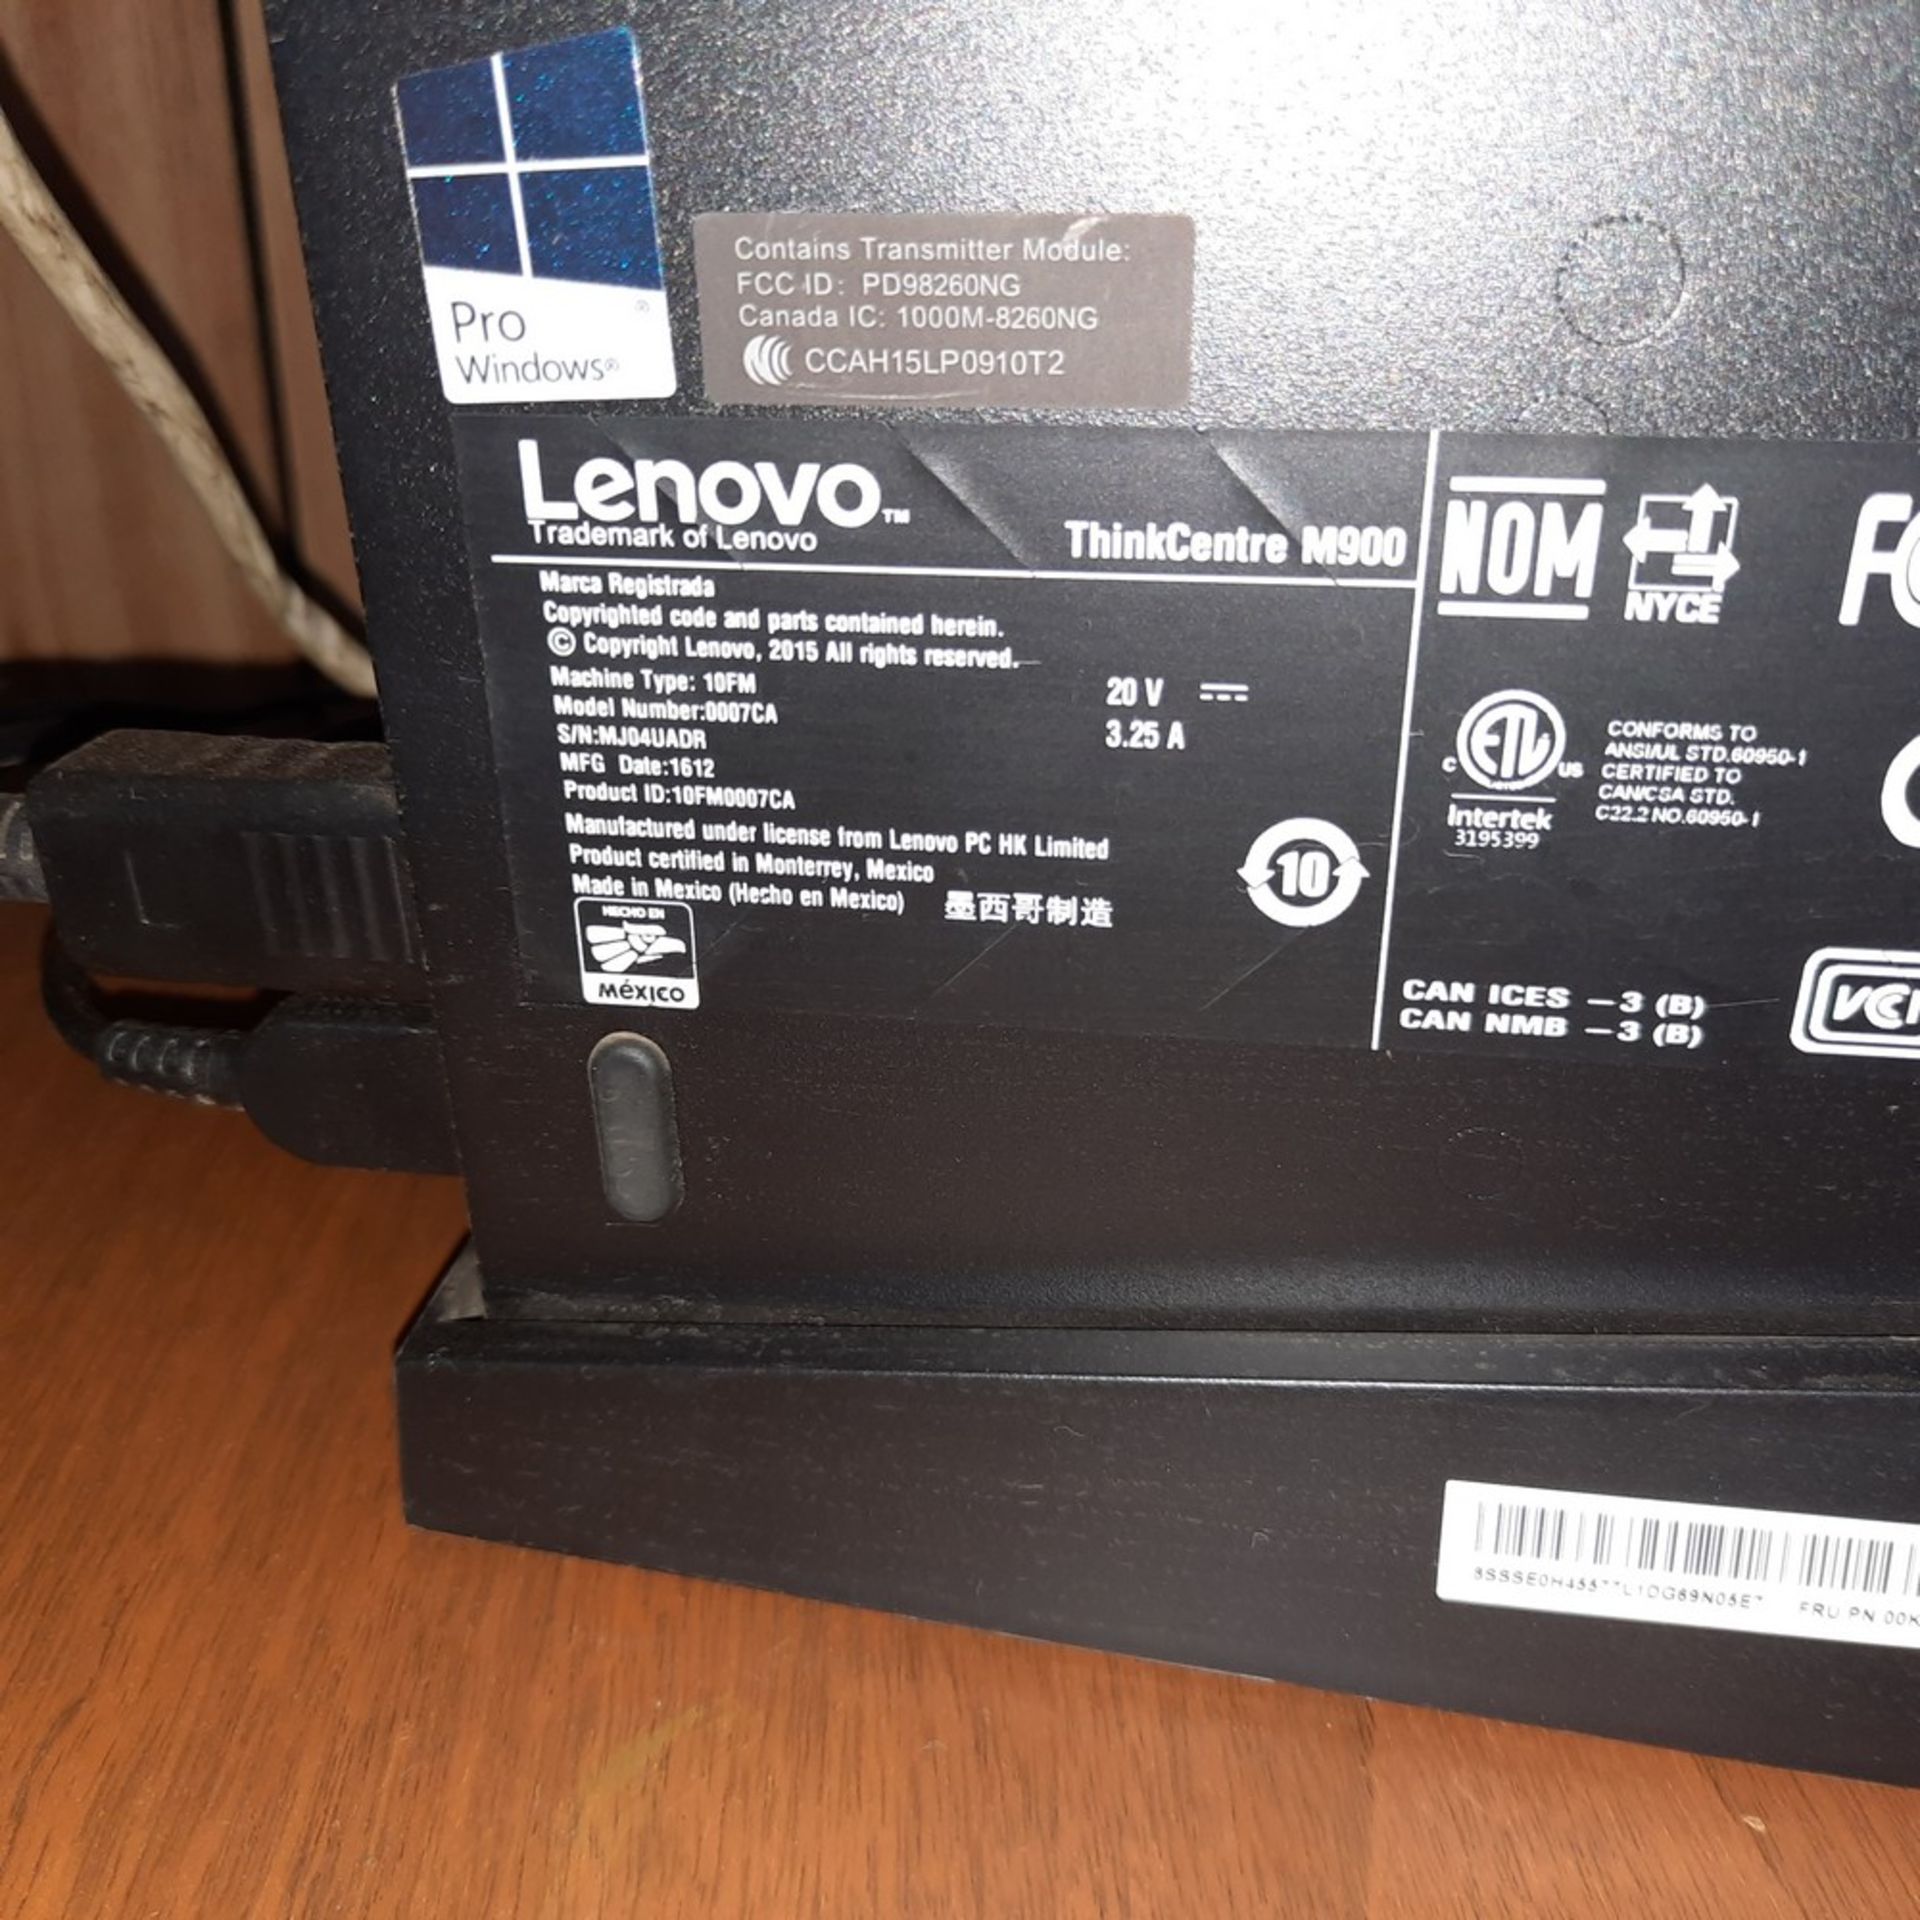 LENOVO ThinkCentre M900, Monitor, Keyboard & Mouse - Image 3 of 3